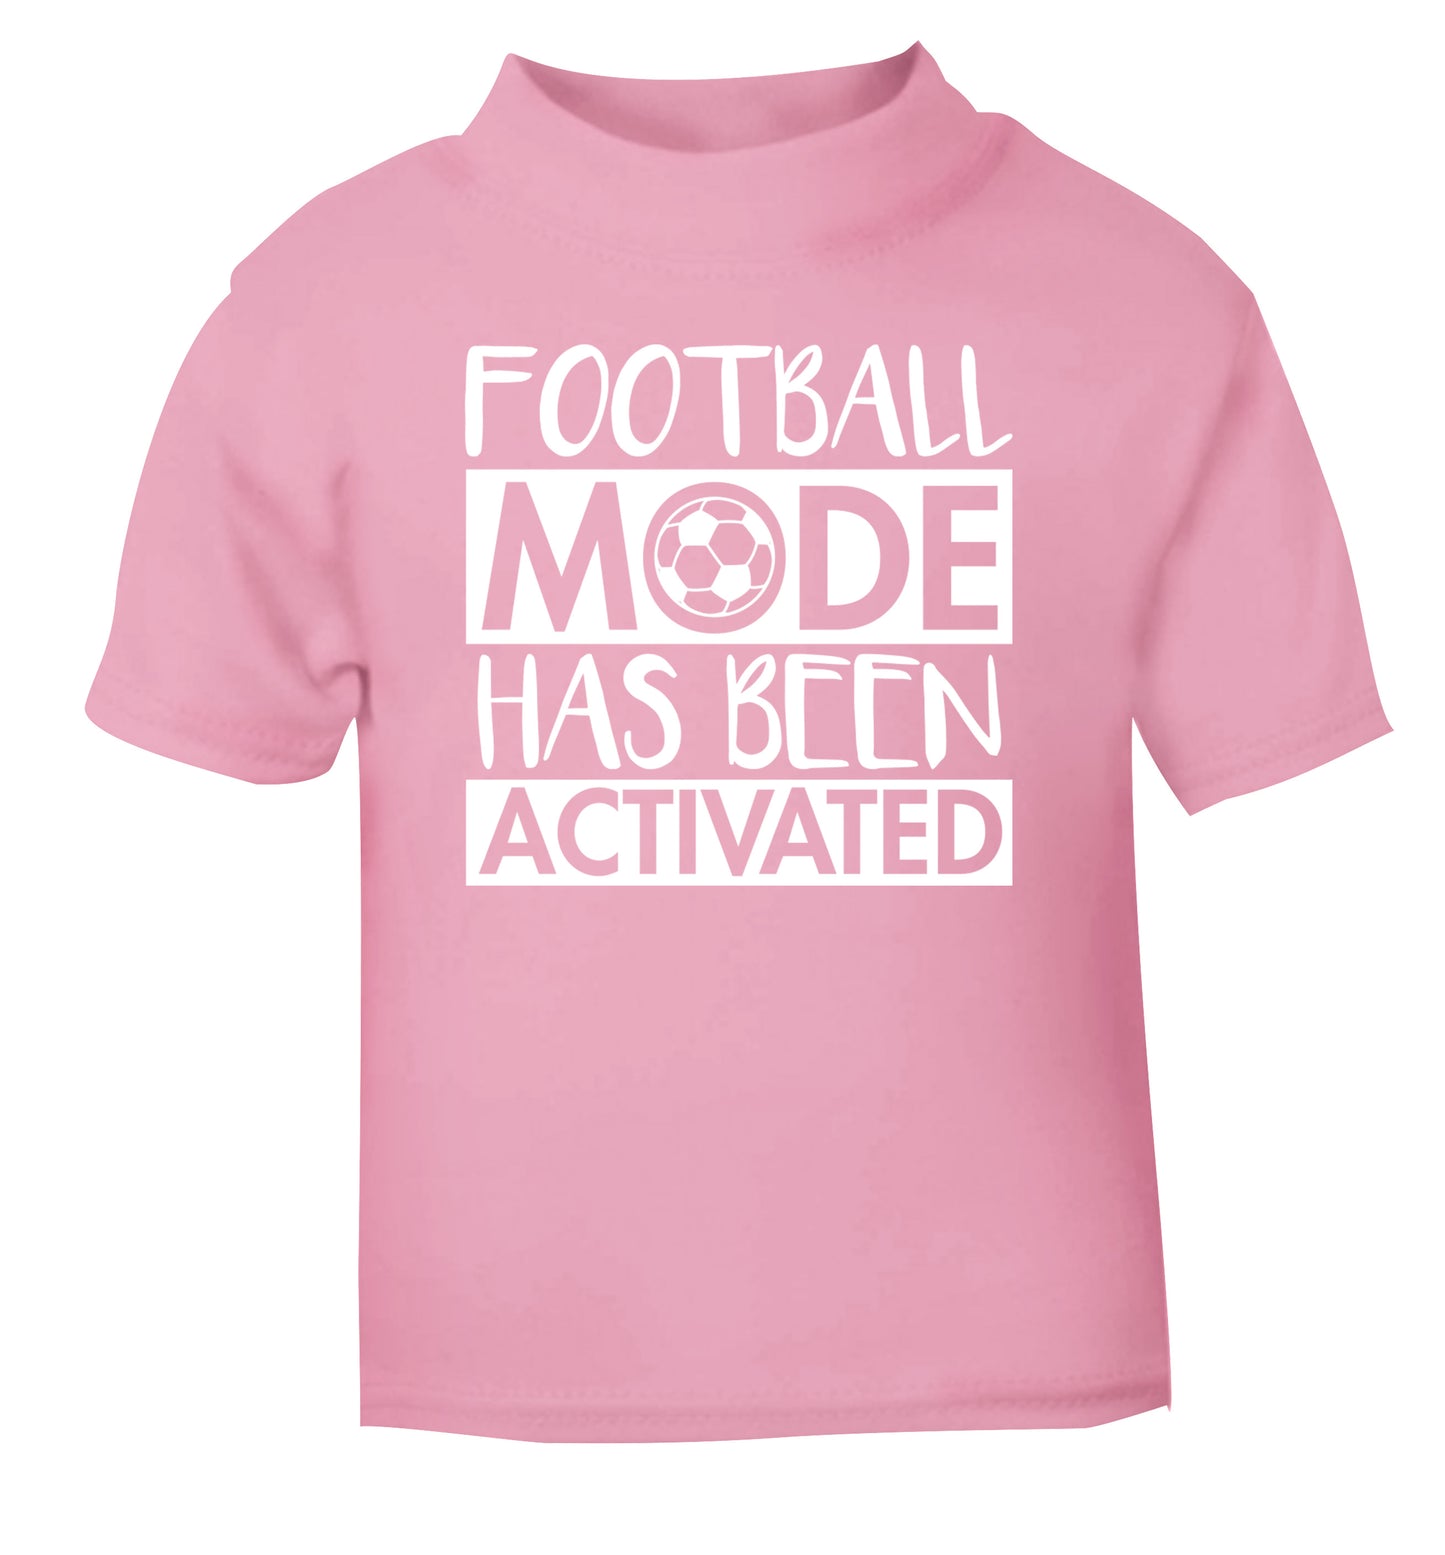 Football mode has been activated light pink Baby Toddler Tshirt 2 Years